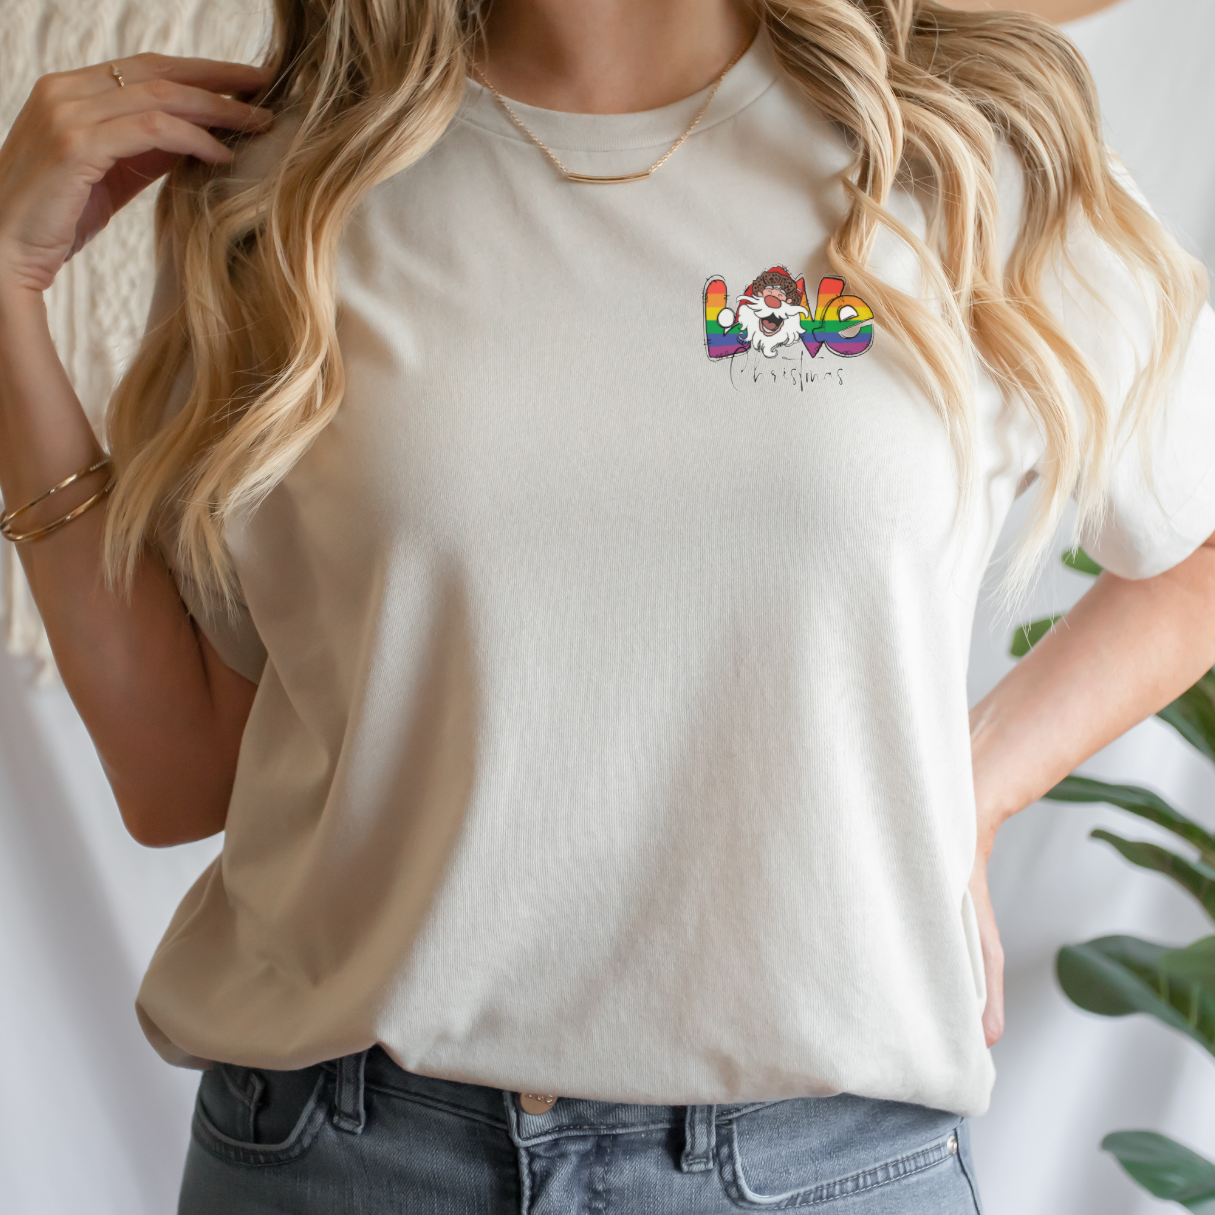 "Pride love Christmas text design centered on natural t-shirt."